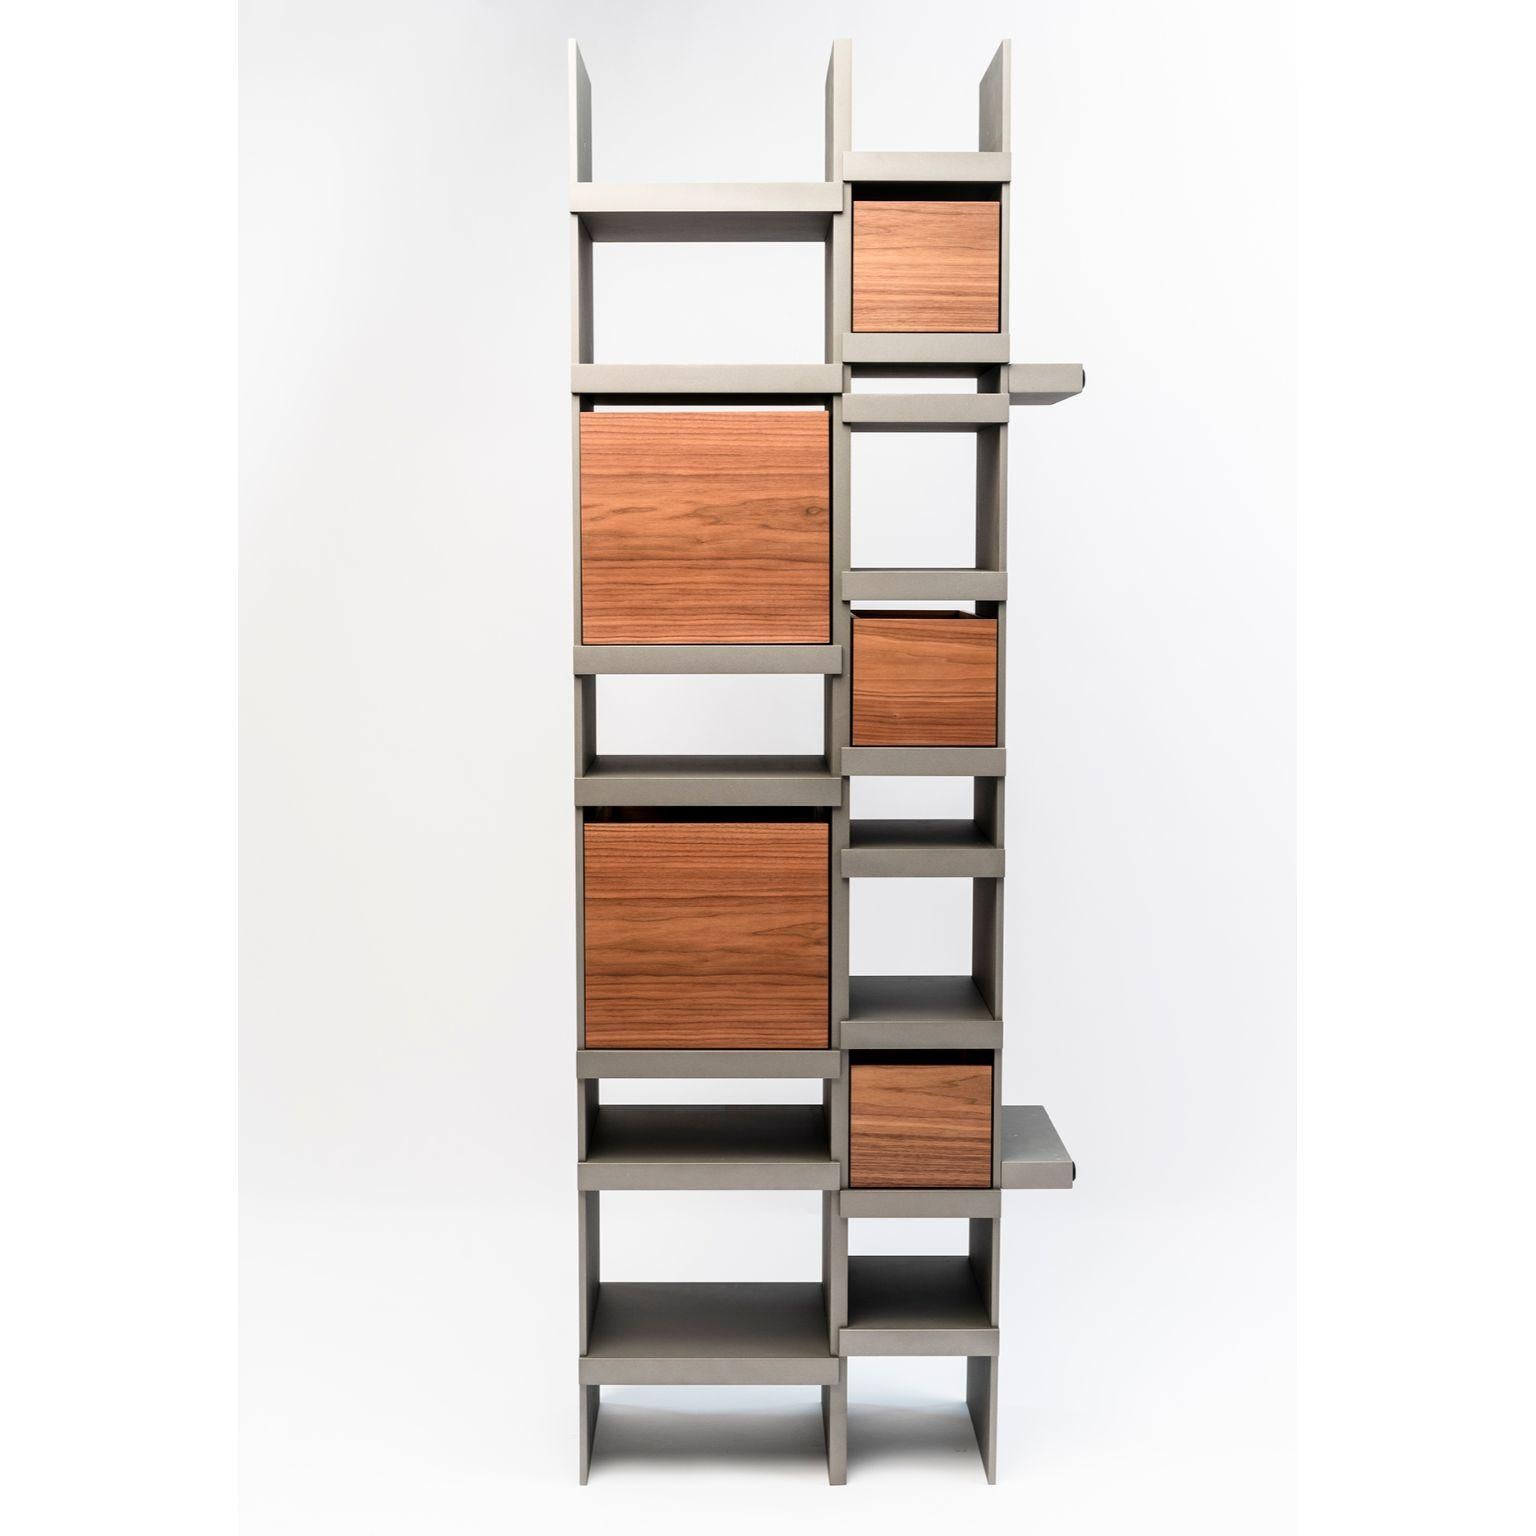 Pyrite Vertical bookshelf by Luca Nichetto
Materials: Drawers: Noce Canaletto solid wood, Leather
 Structure: Dark green NCS 8010 B70G/Coral NCS 2570 Y70R/Nero Ferro/ Light grey NCS 2002 
 Y50R/Peltro lacquered multilayer wood
Dimensions: W 59 x